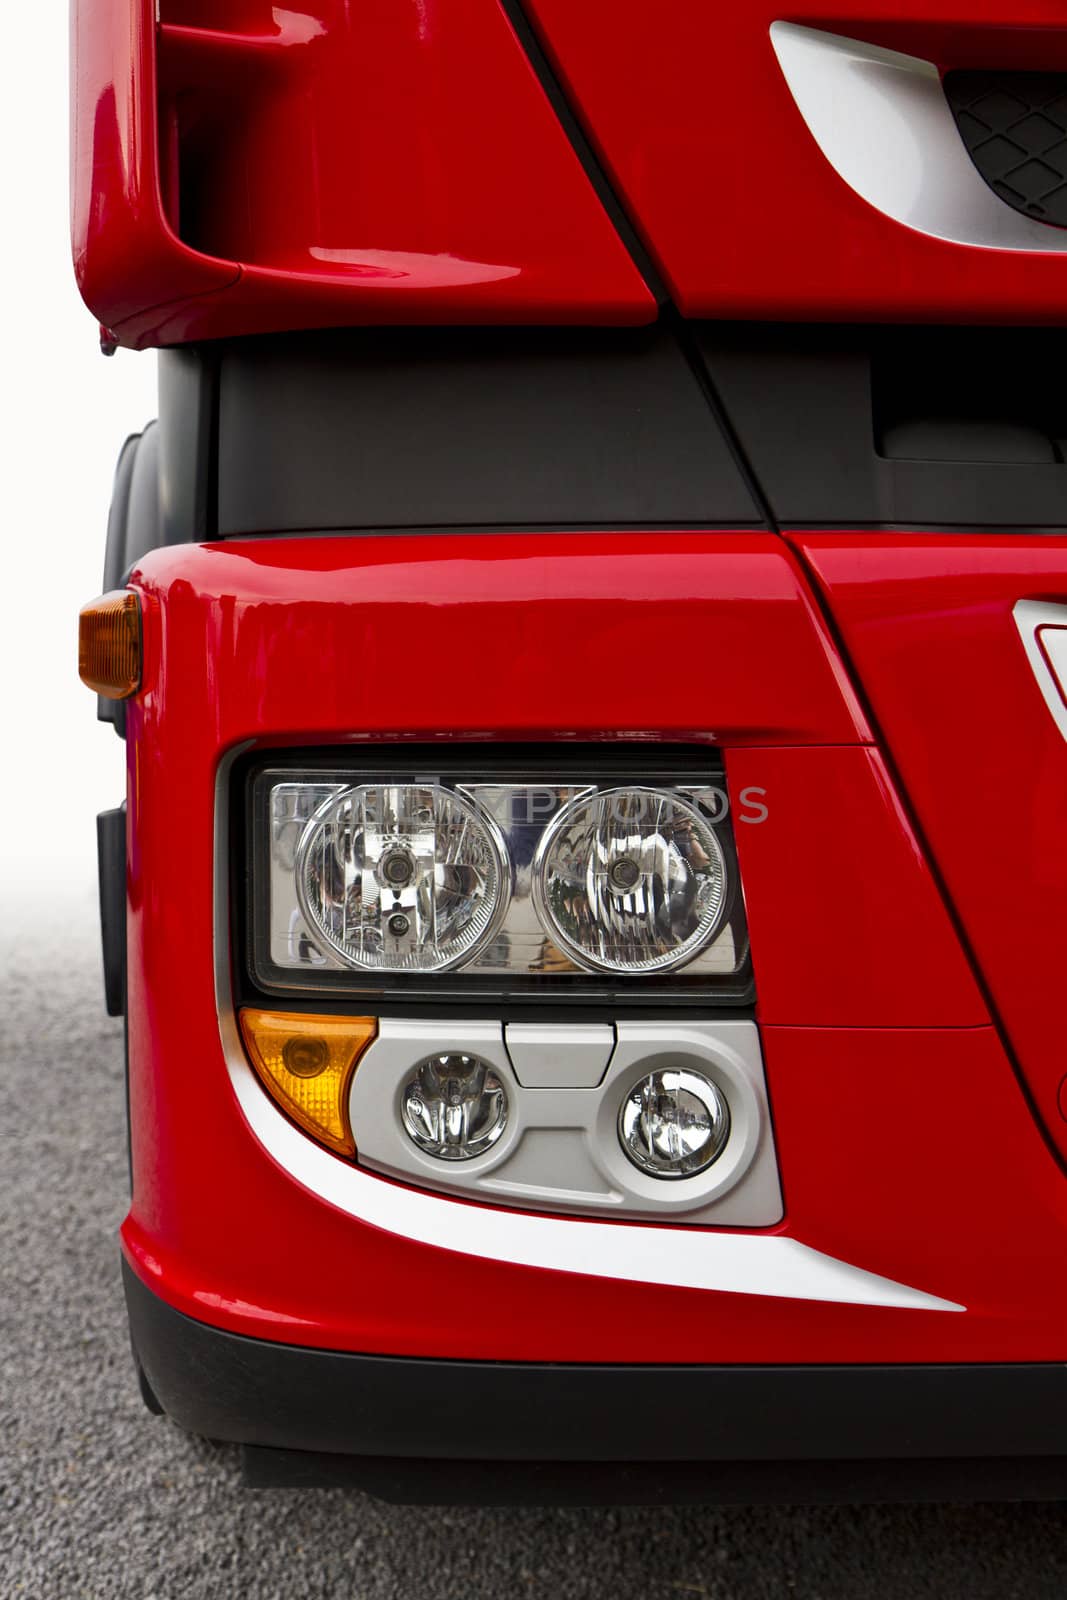 front view of red truck, font light